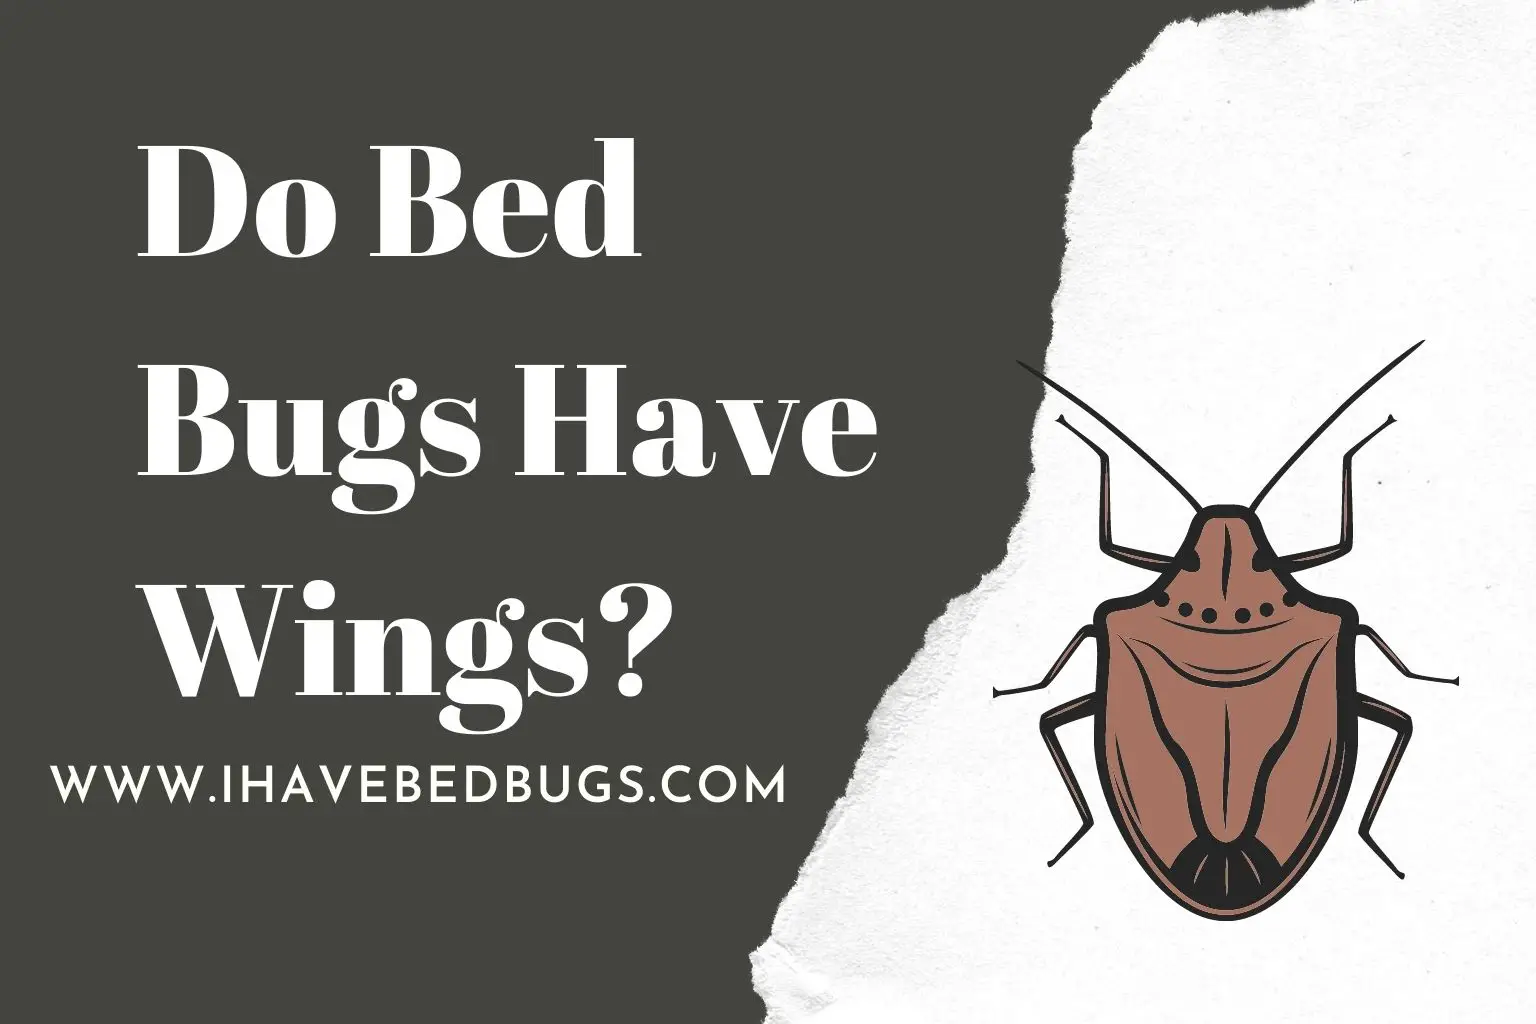 Do Bed Bugs Have Wings